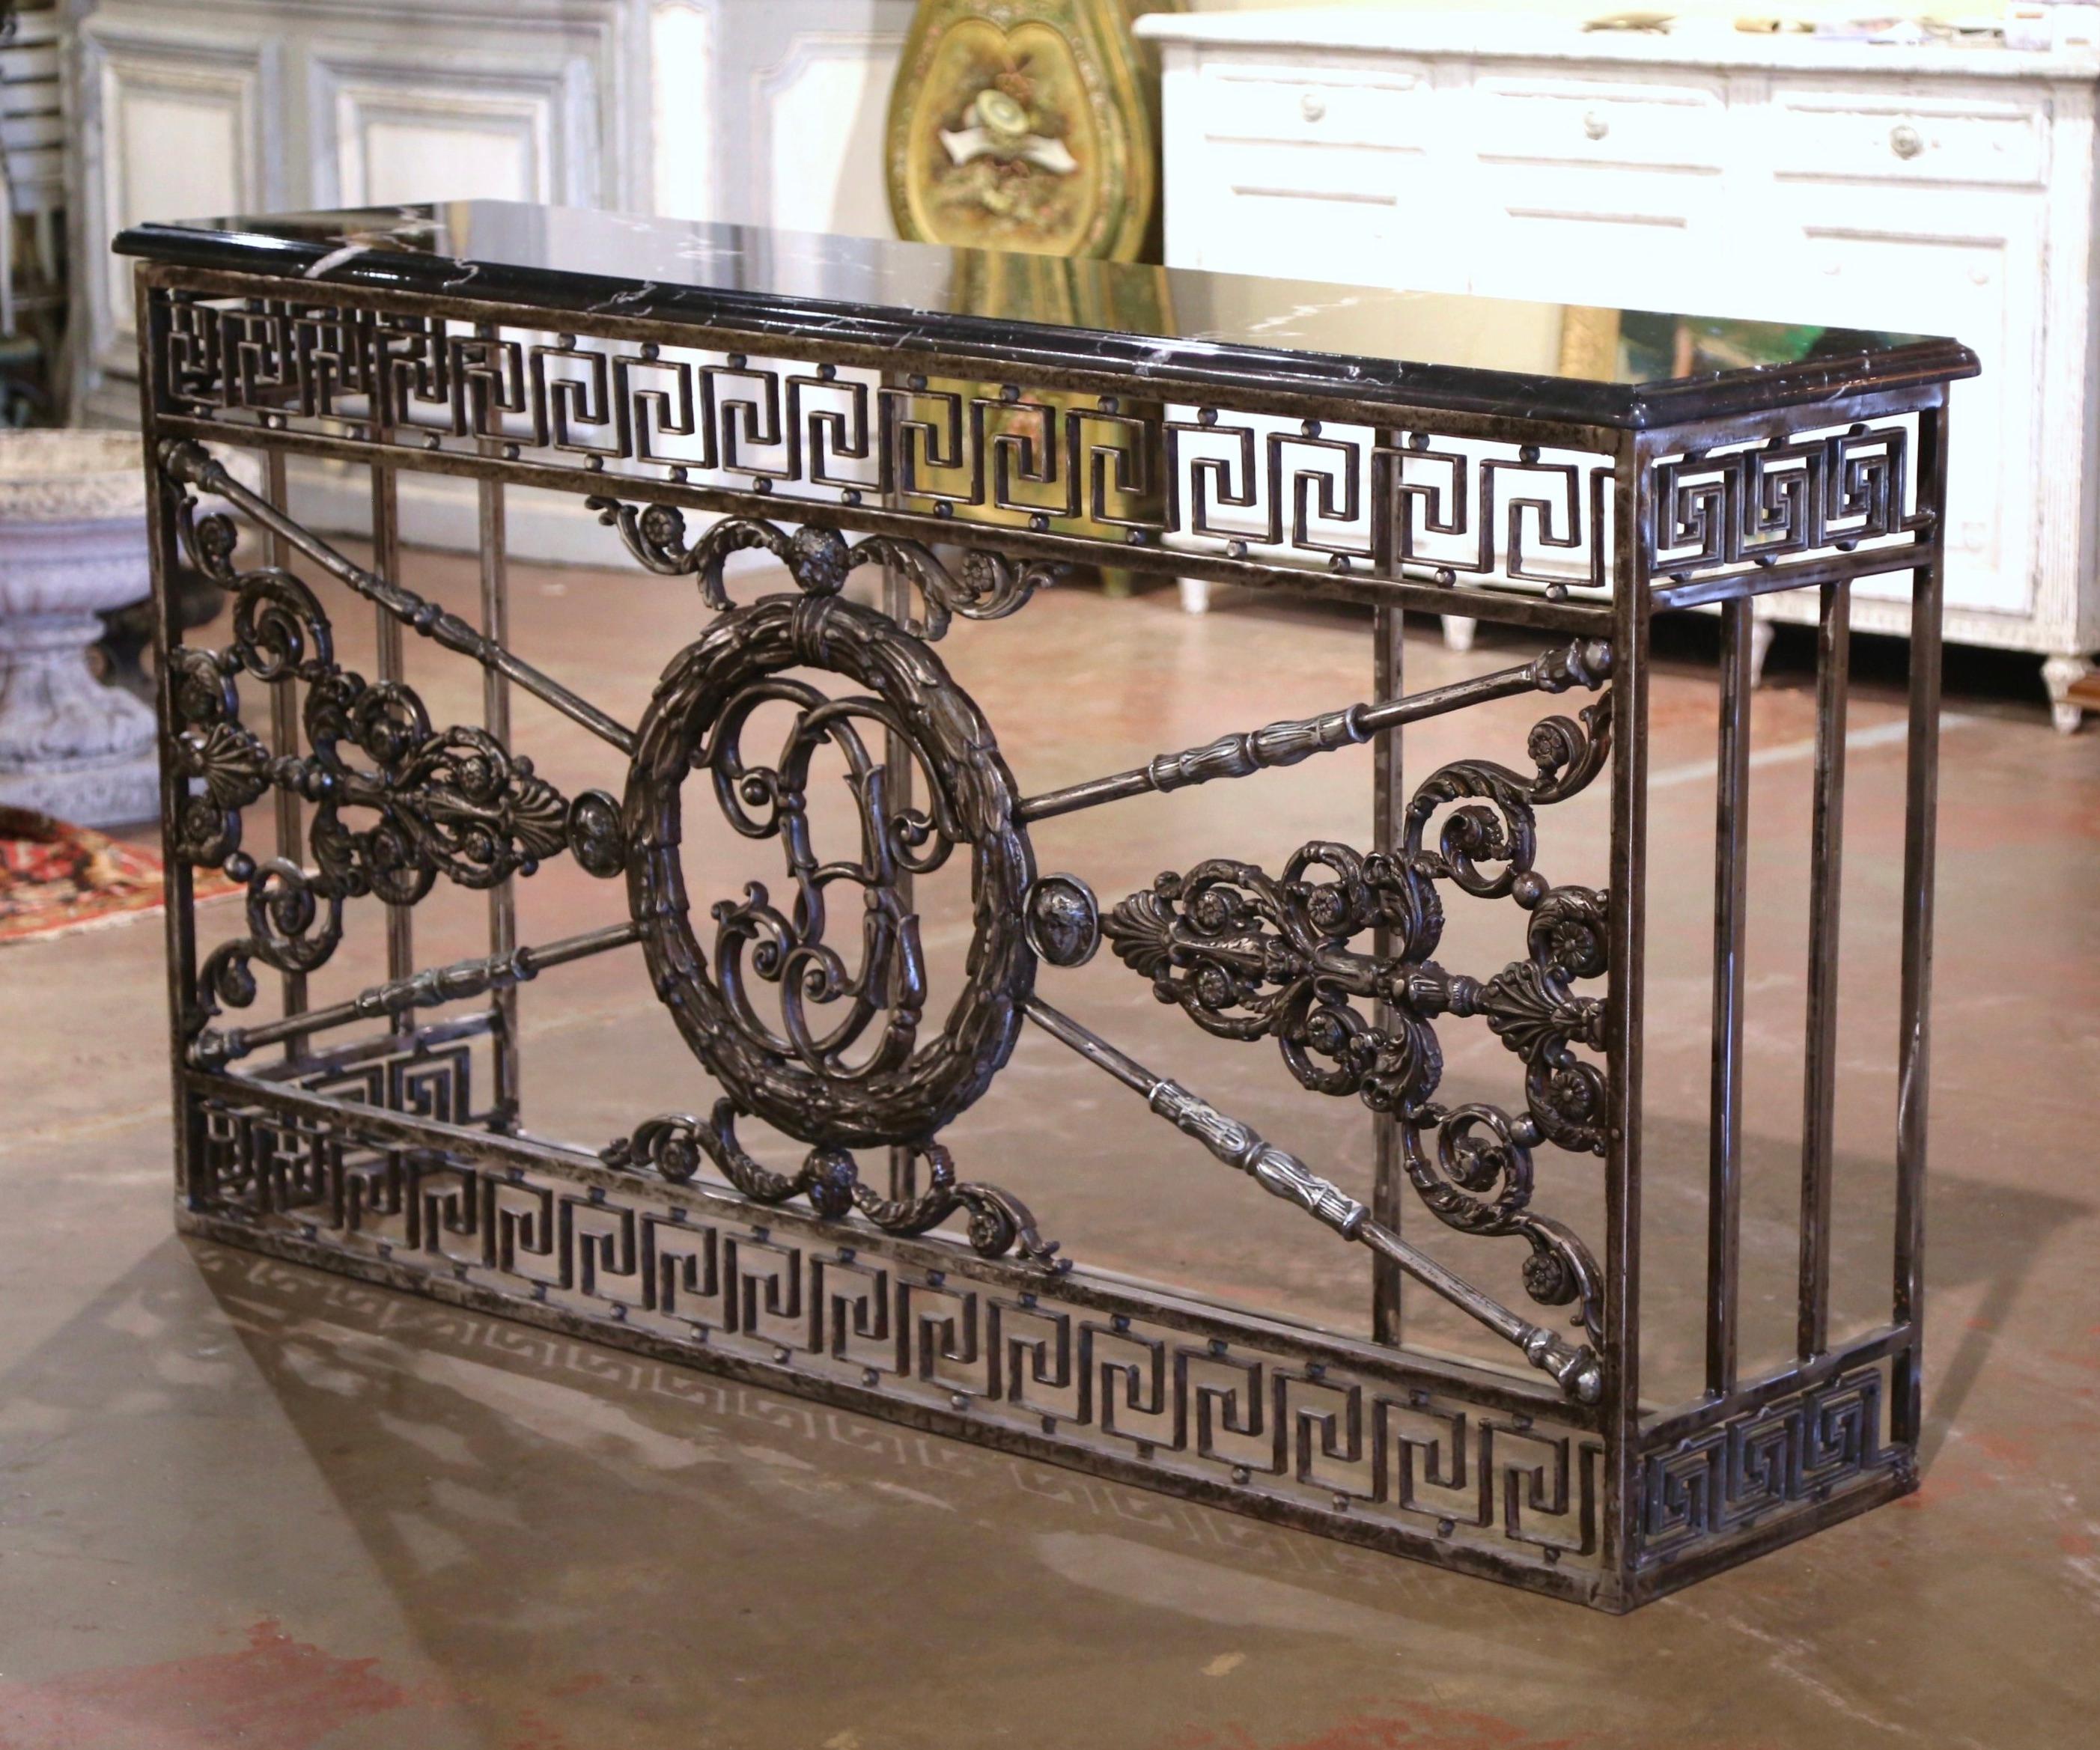 Forged in France circa 1750, the antique console table base stands on straight feet connected with a bottom stretcher. Long and narrow, the Louis XIV style table with Greek motifs at the top, features intricate scrolled decor, leaf motif, and